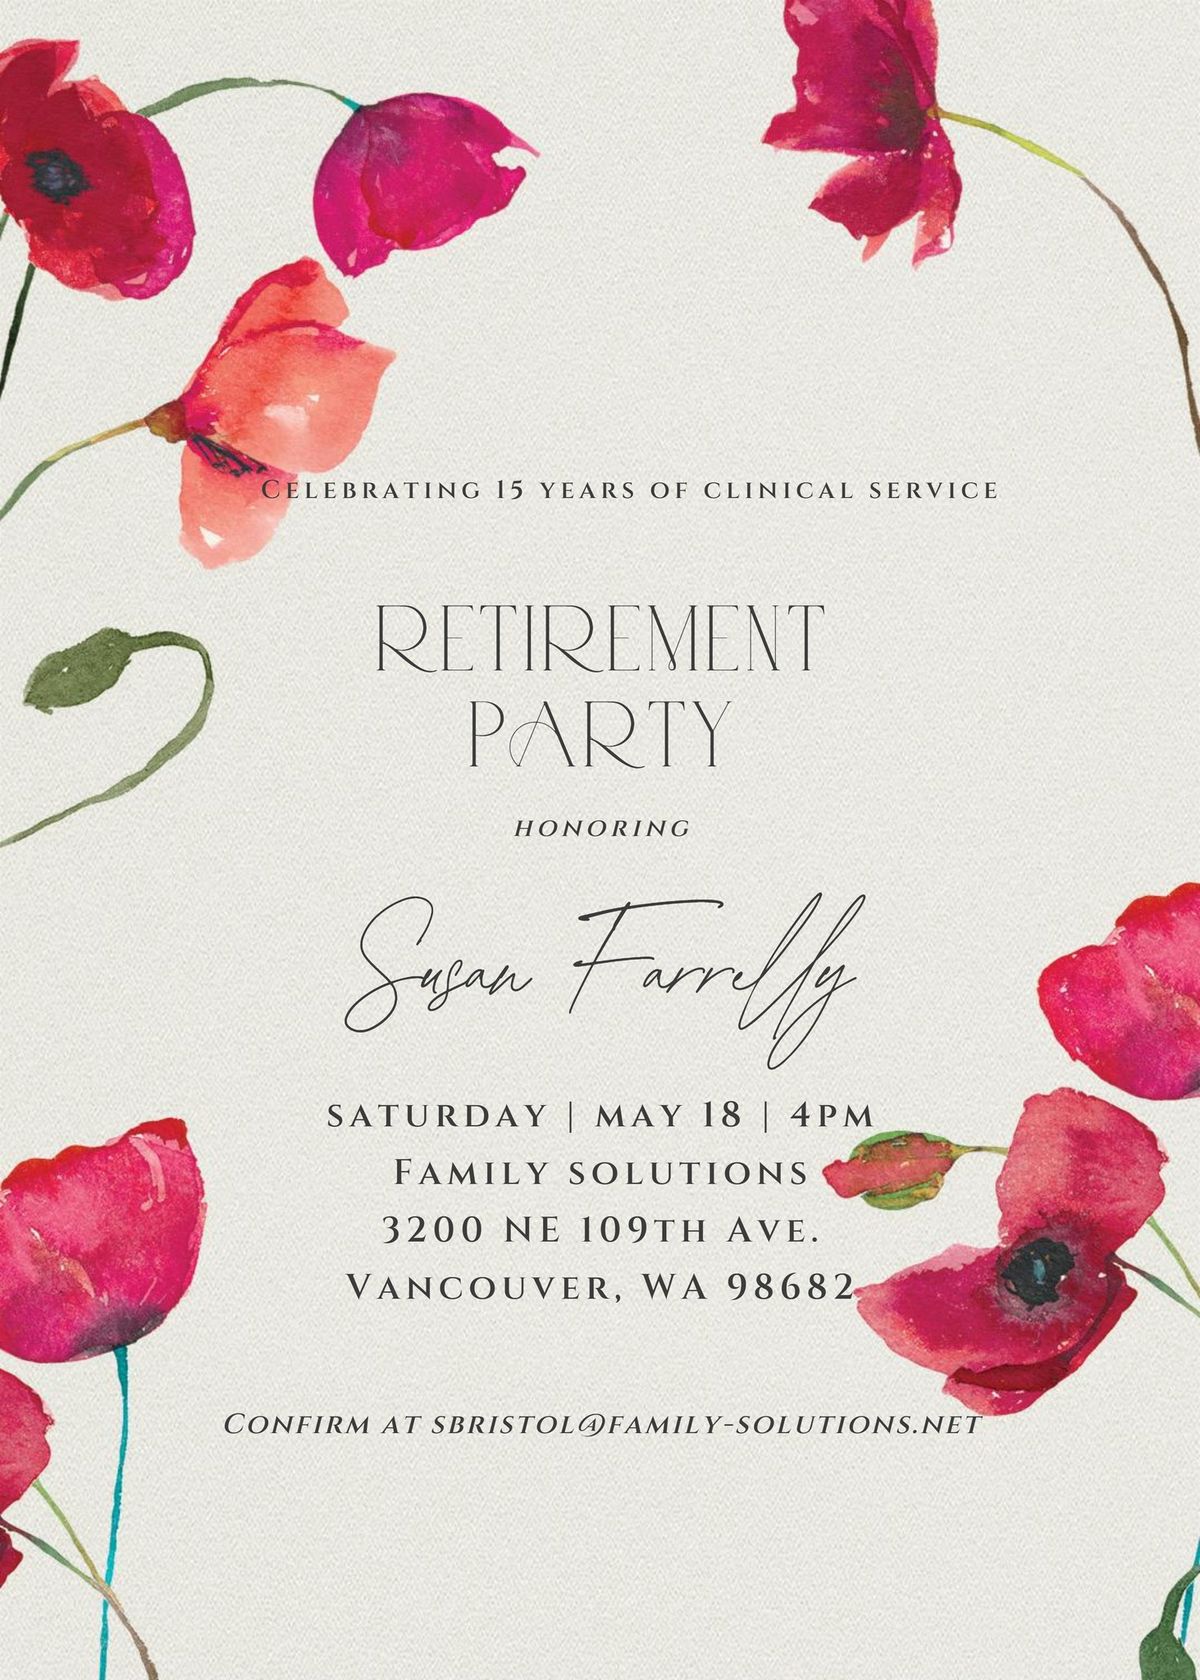 Retirement Party for Susan Farrelly